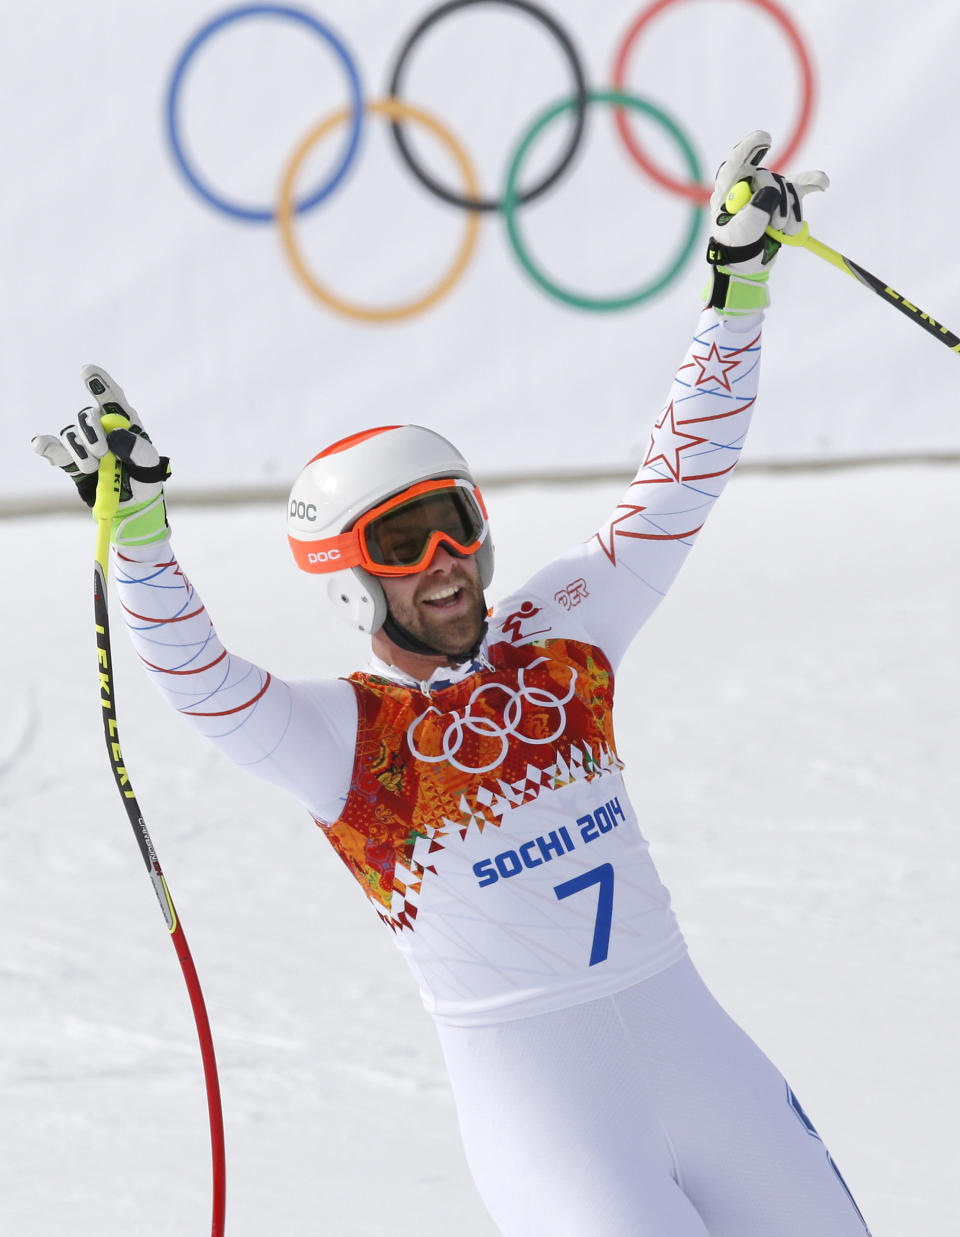 United States' Travis Ganong gestures after finishing the men's downhill at the Sochi 2014 Winter Olympics, Sunday, Feb. 9, 2014, in Krasnaya Polyana, Russia. (AP Photo/Christophe Ena)